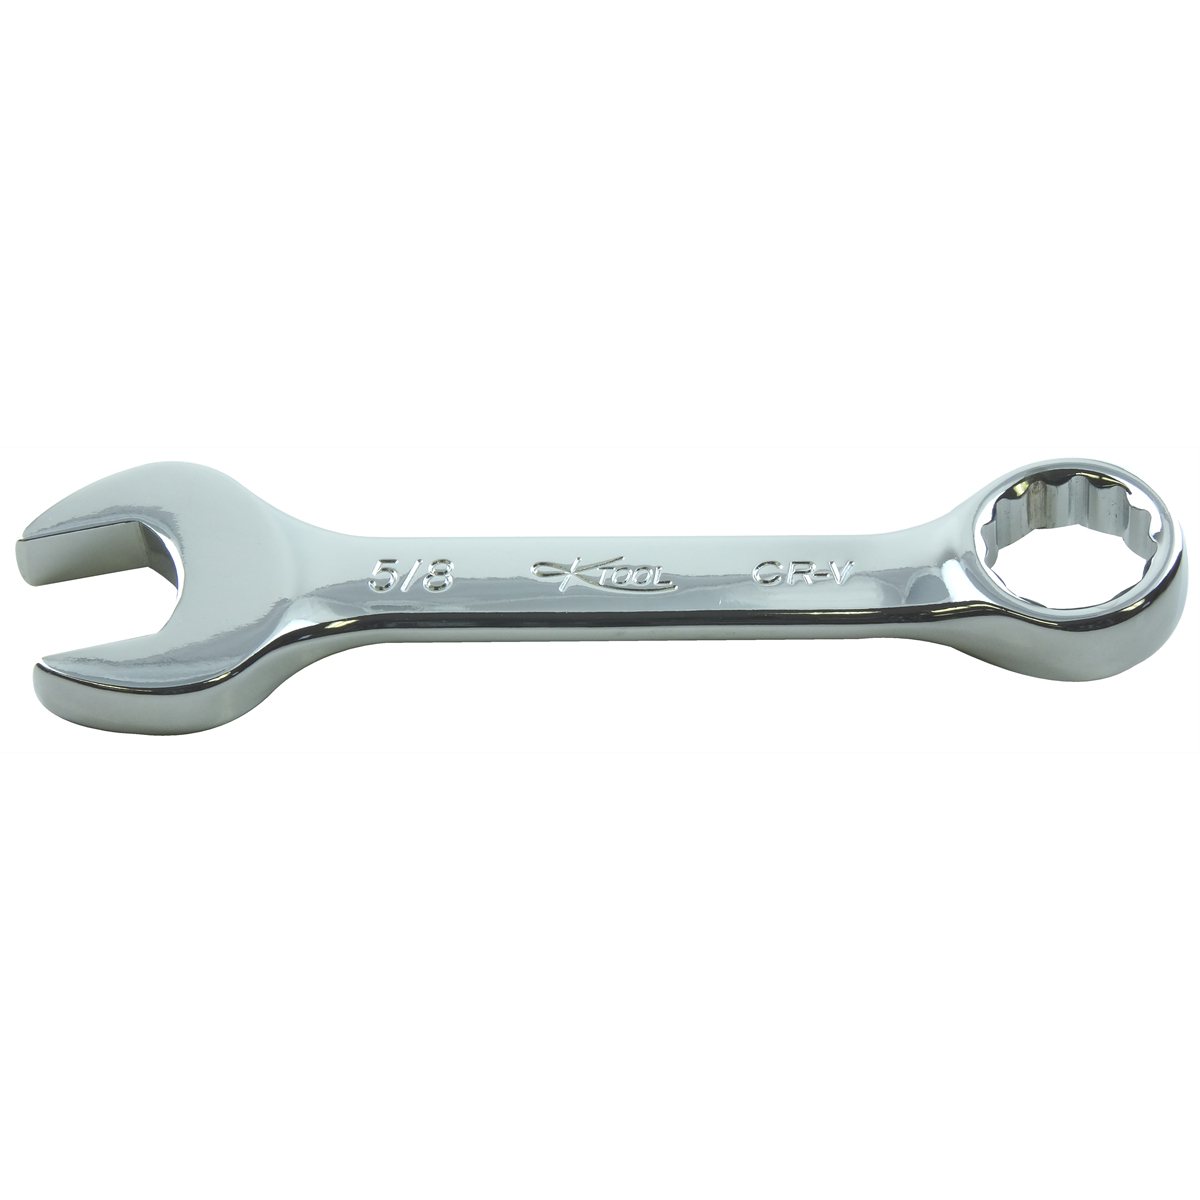 Short High Polish Fractional Combination Wrench - 5/8 In